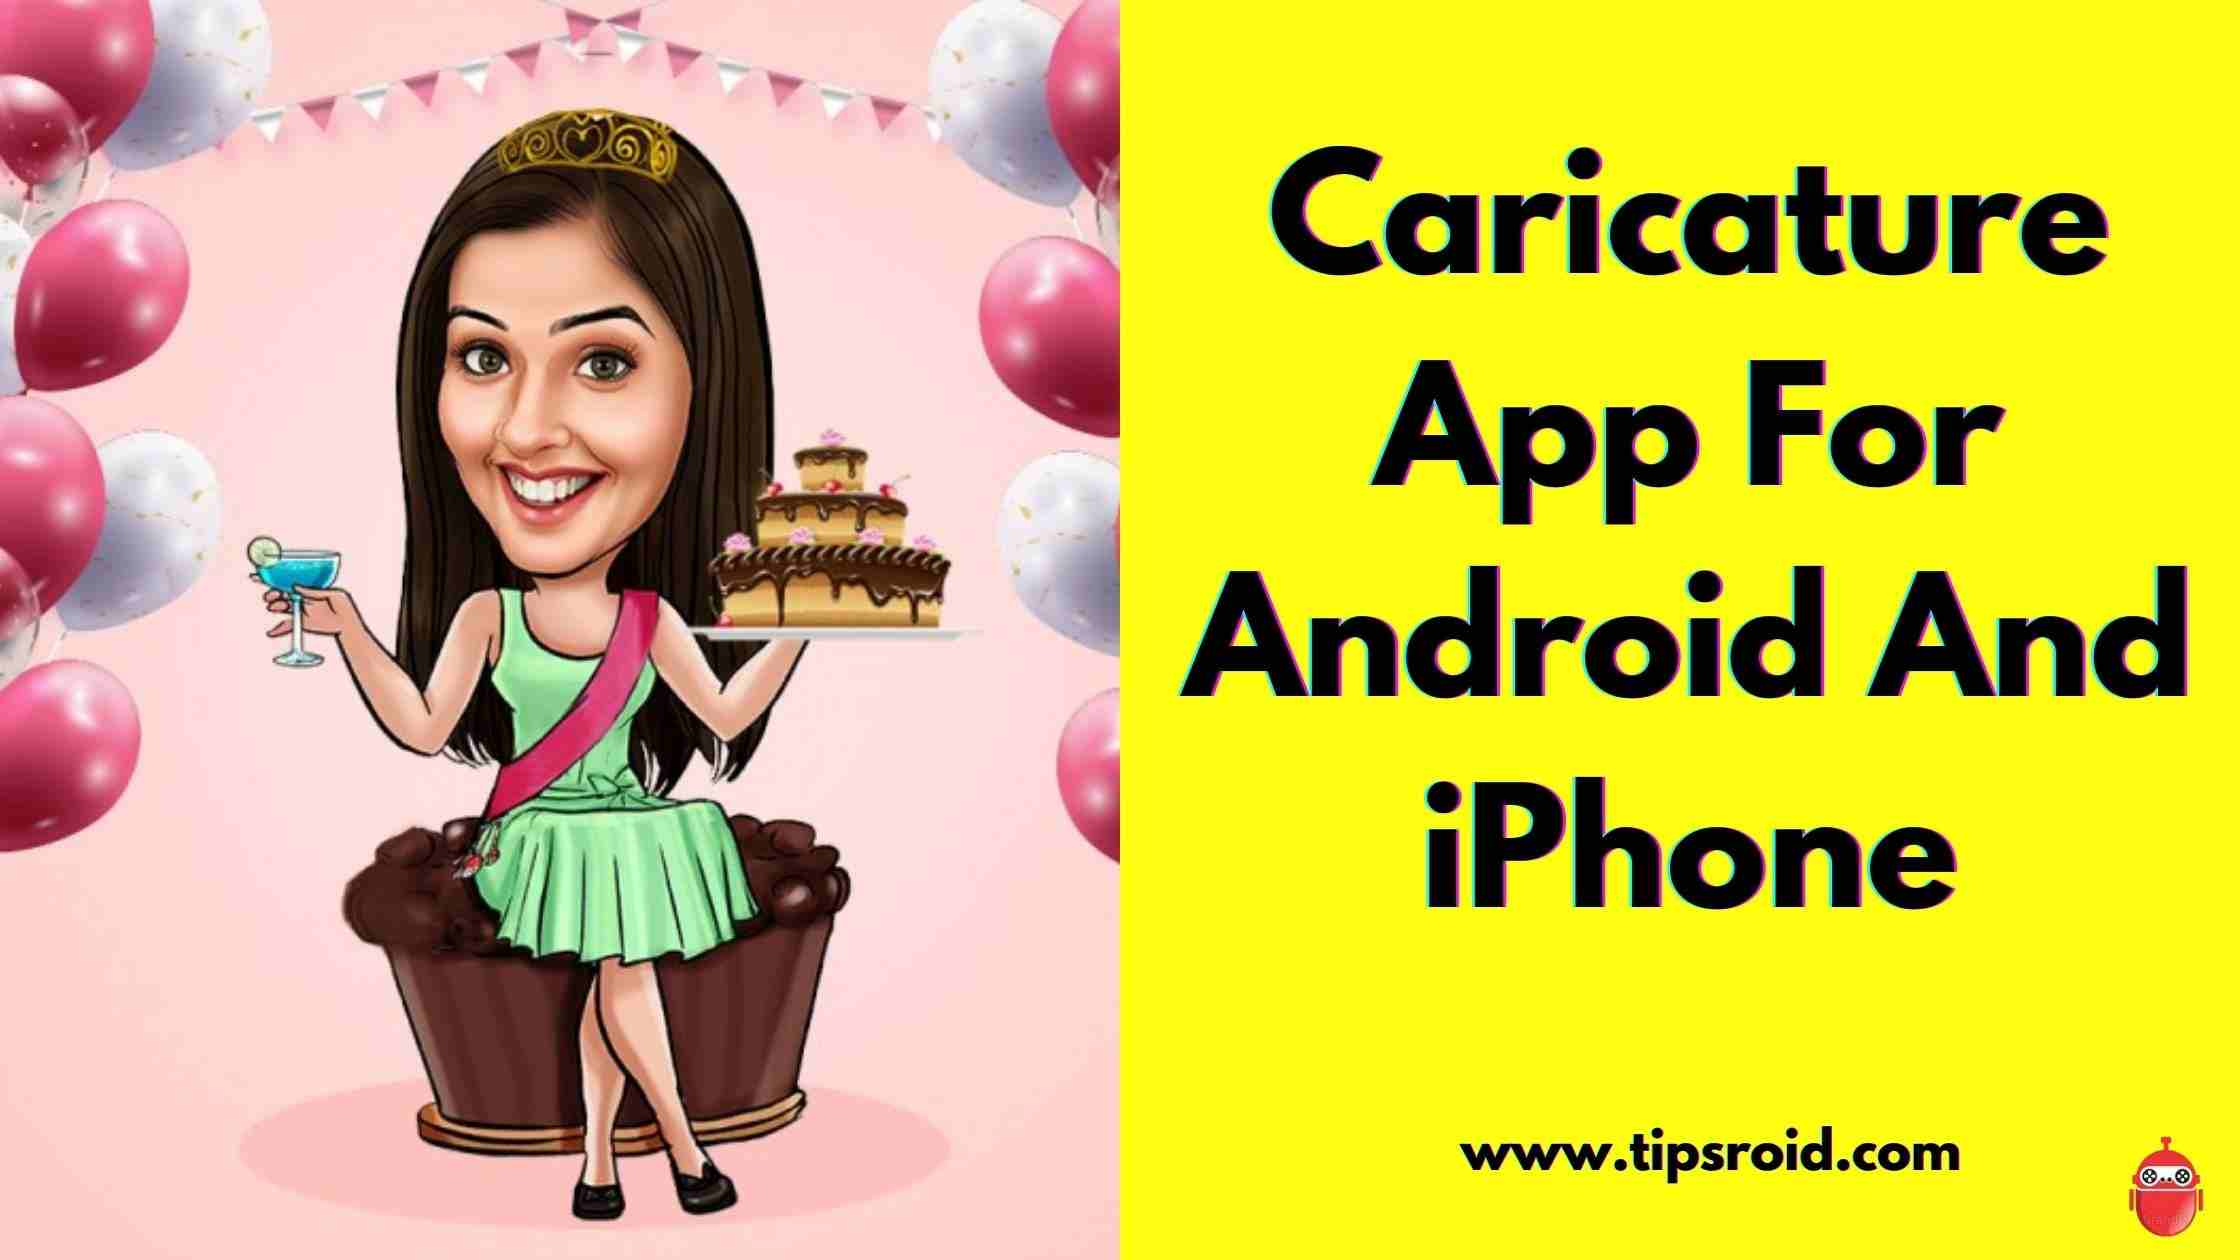 10 Best Caricature App For Android And iPhone